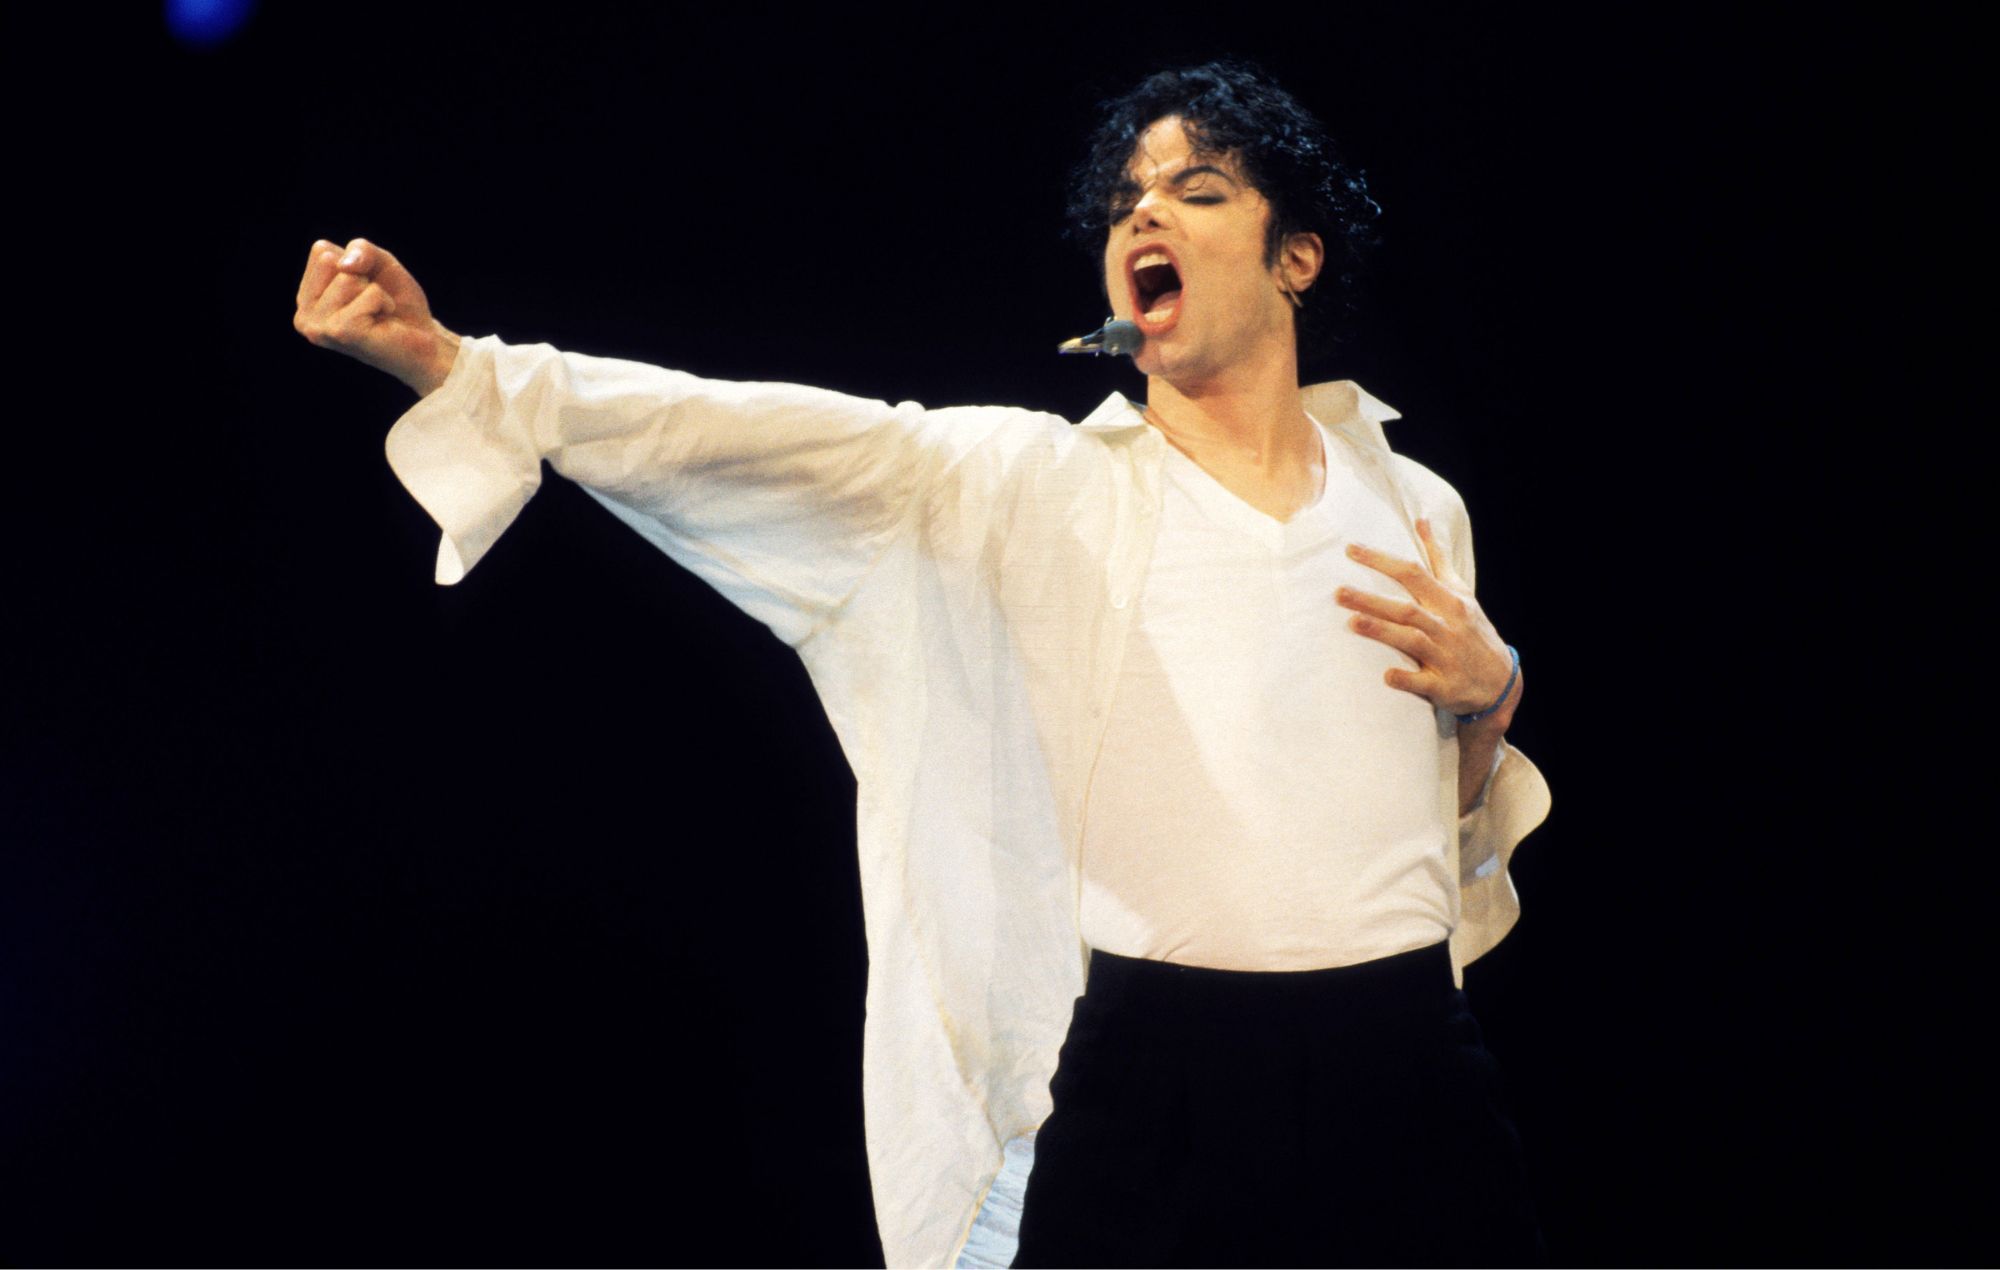 Michael Jackson biopic trailer goes down well with critics at CinemaCon